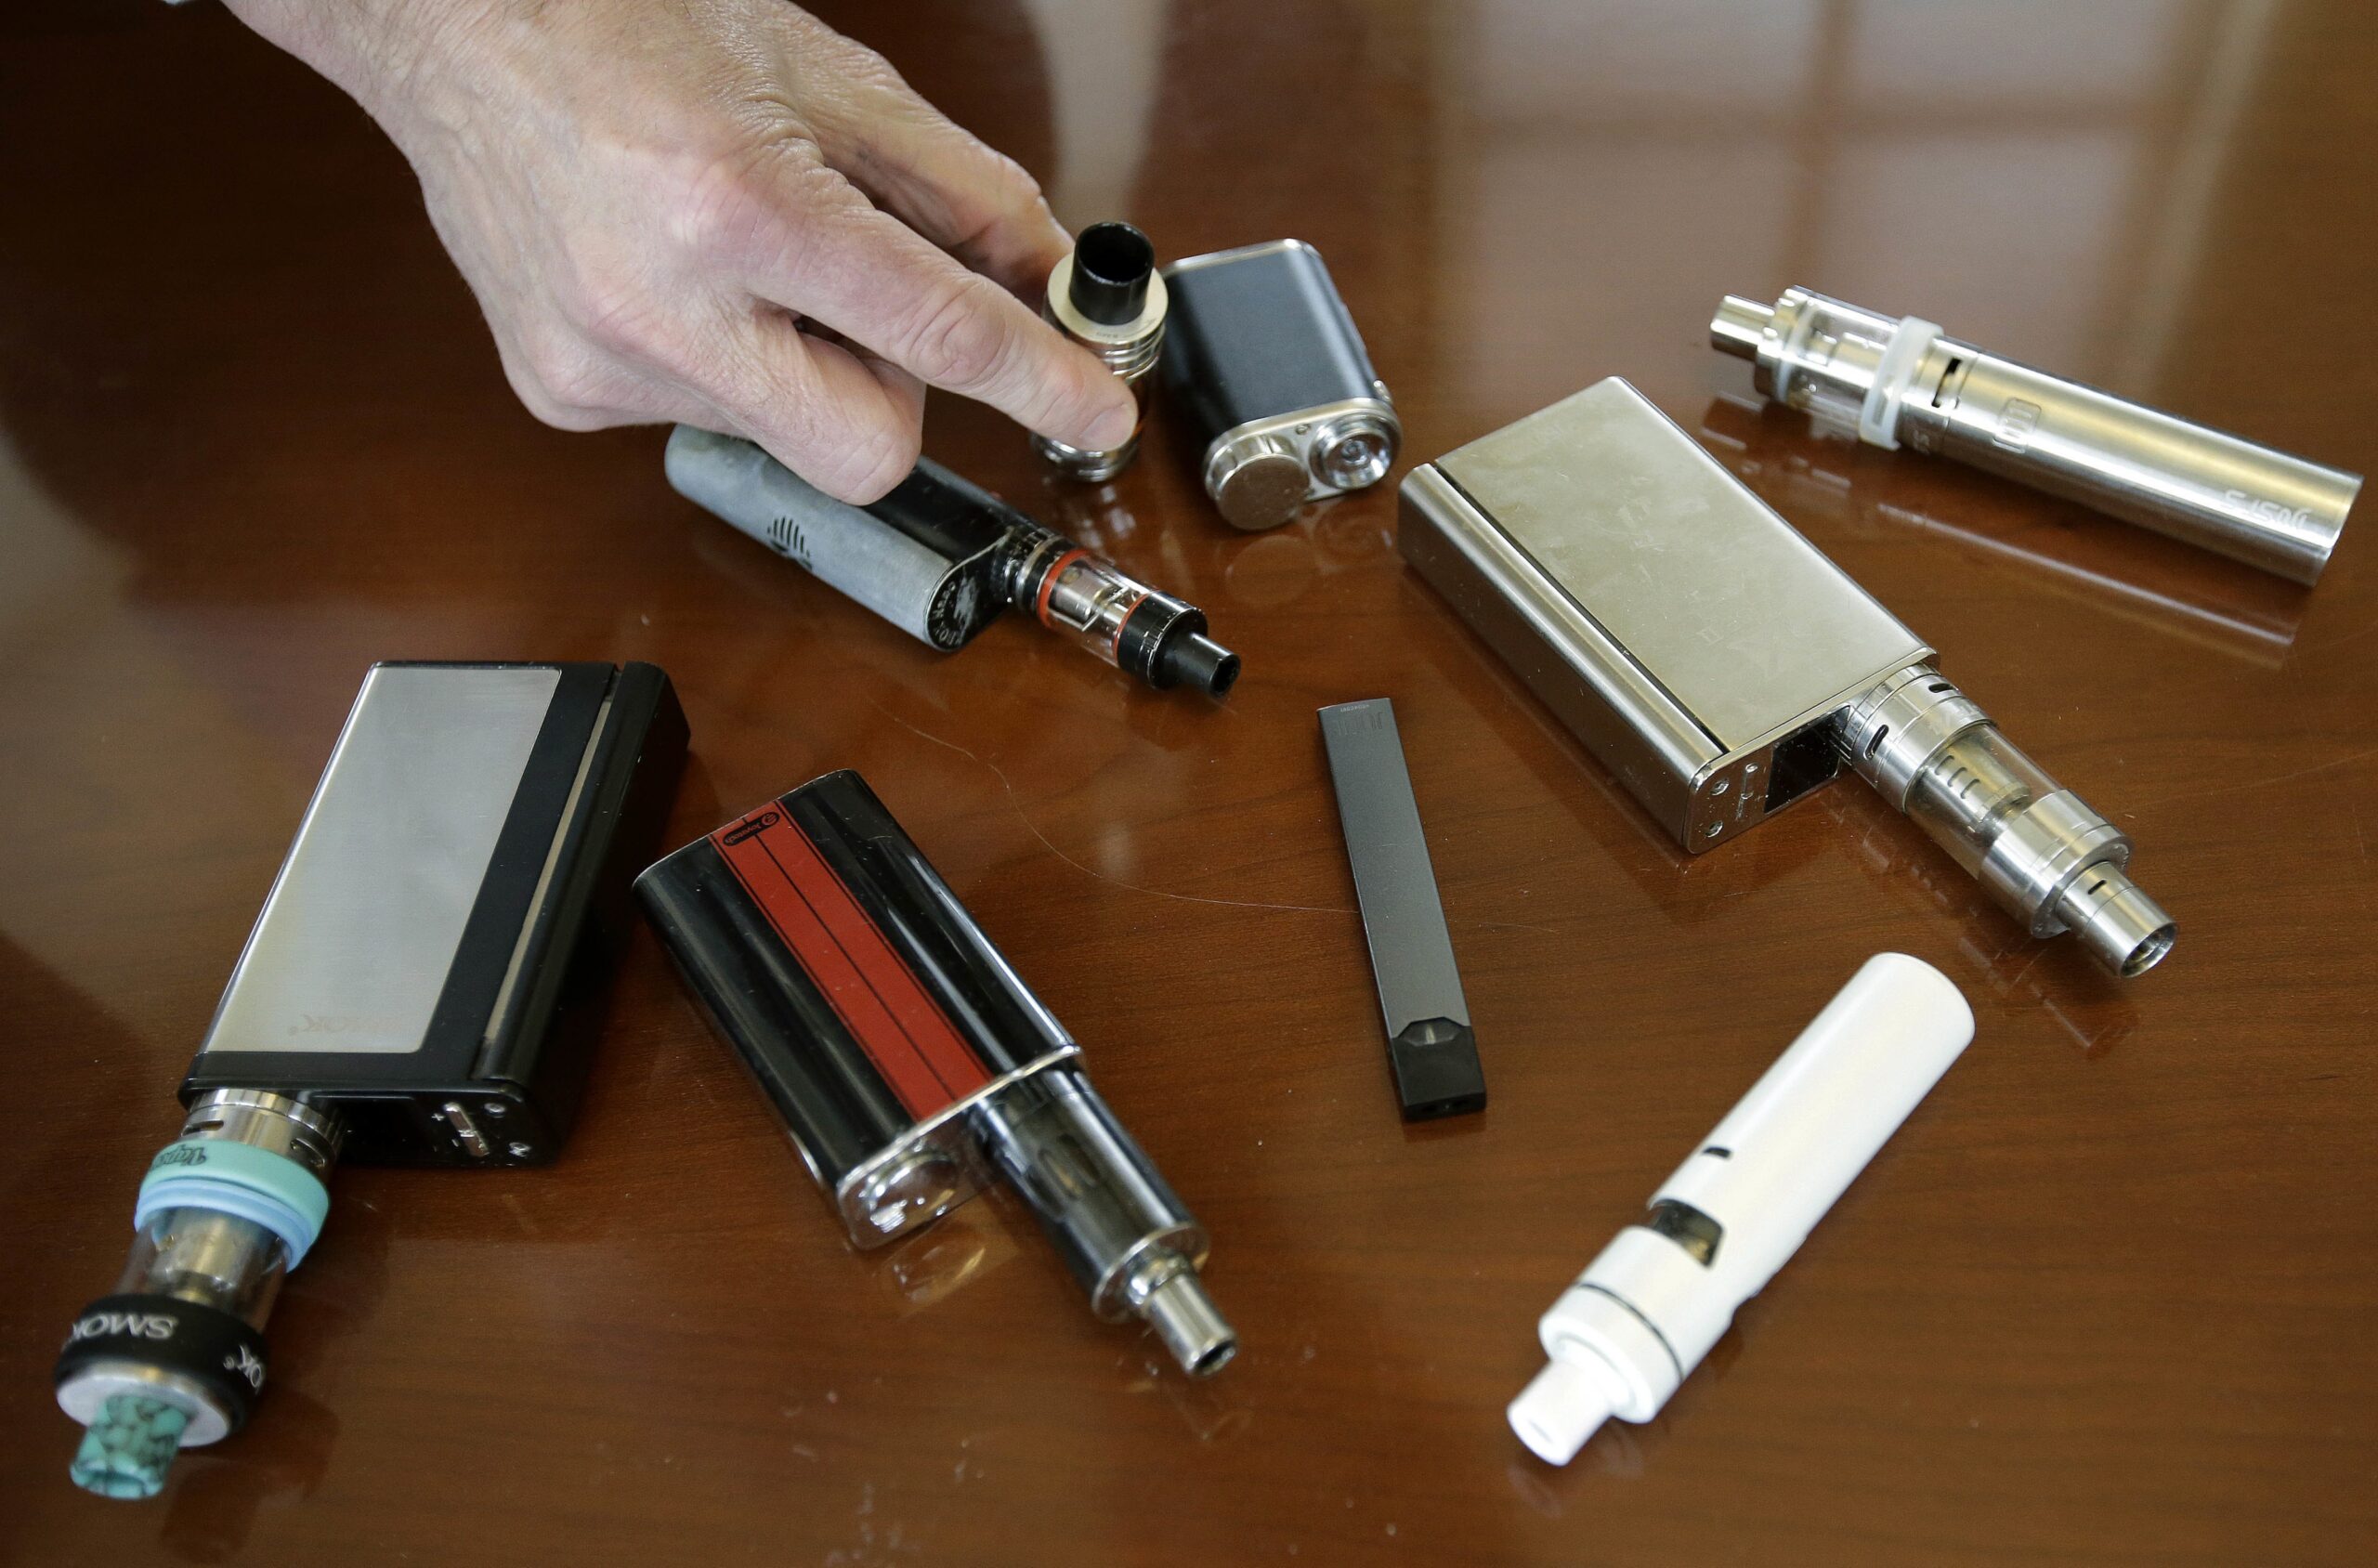 Report: Three-Fourths Of E-Cigarette Users Had Cartridges Containing THC